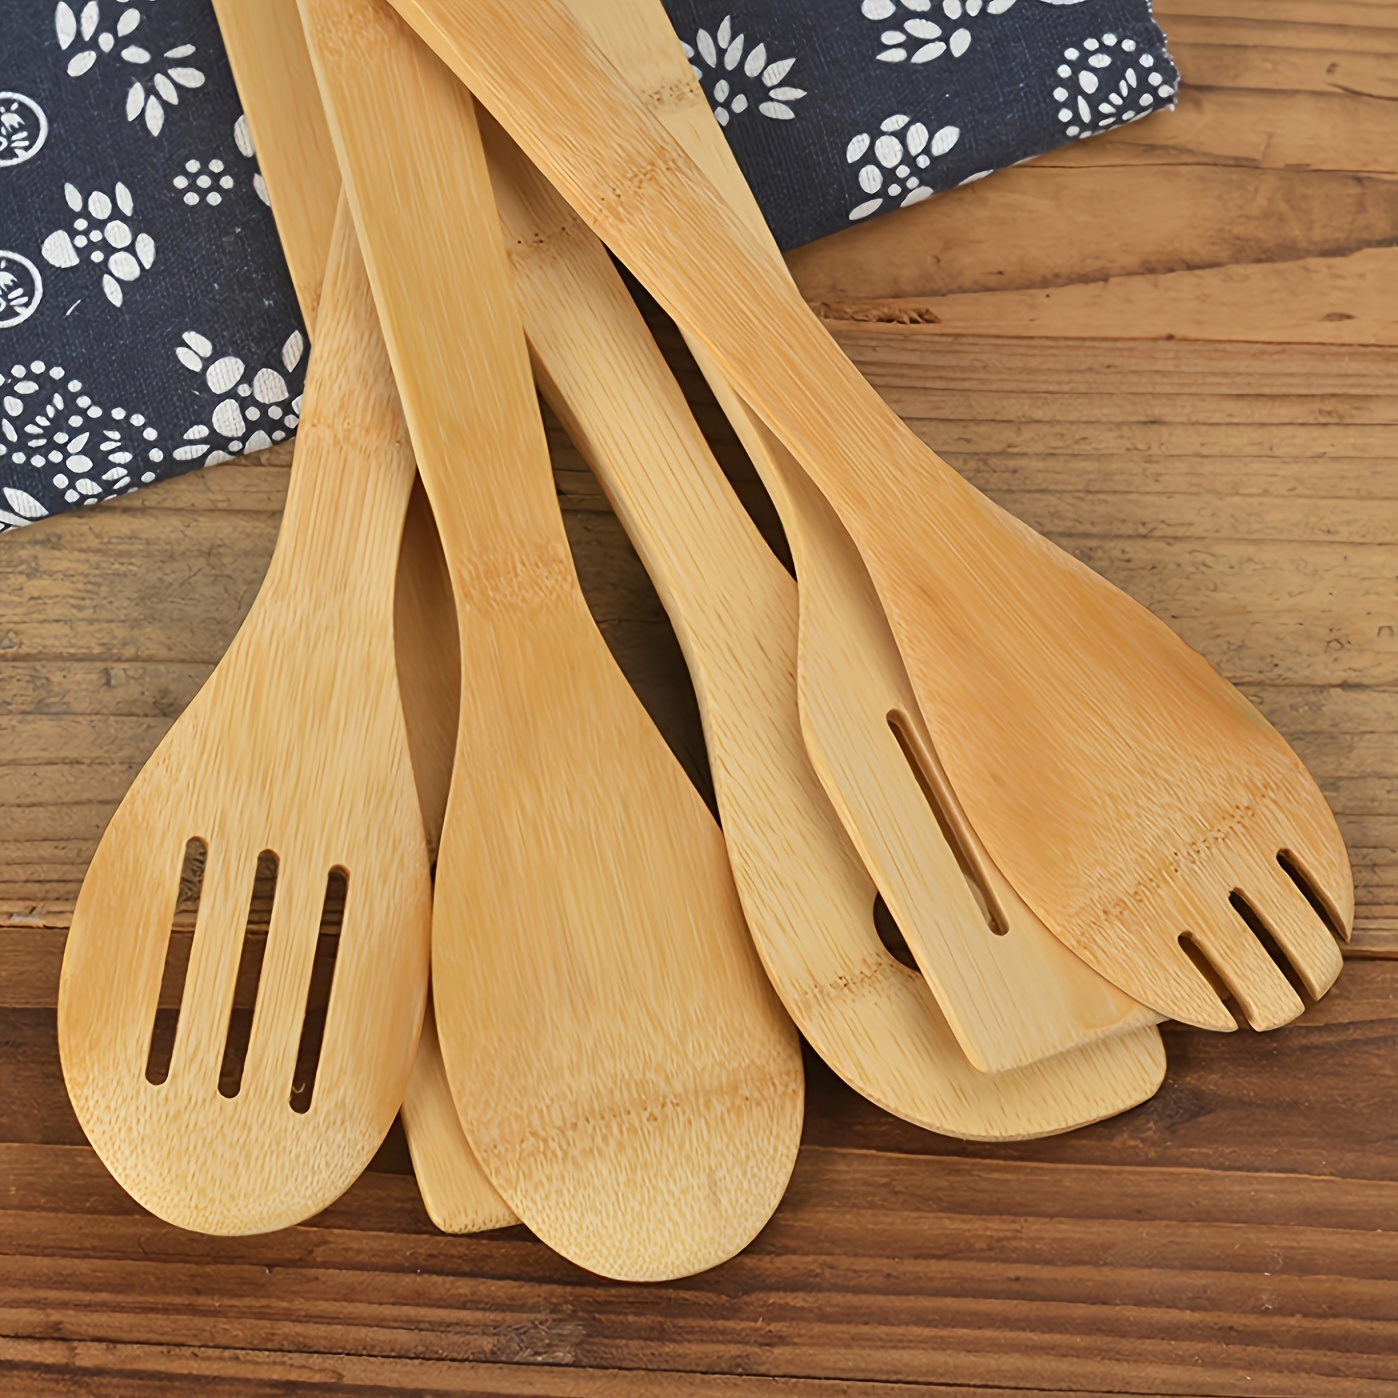 Wooden Utensils For Cooking,11 Pcs Wooden Spoons For Cooking, Teak Wooden  Utensils Set, Wood Kitchen Utensils For Nonstick Pan, Wood Spatula Spoon  Nonstick Kitchen Utensil Set (11) 